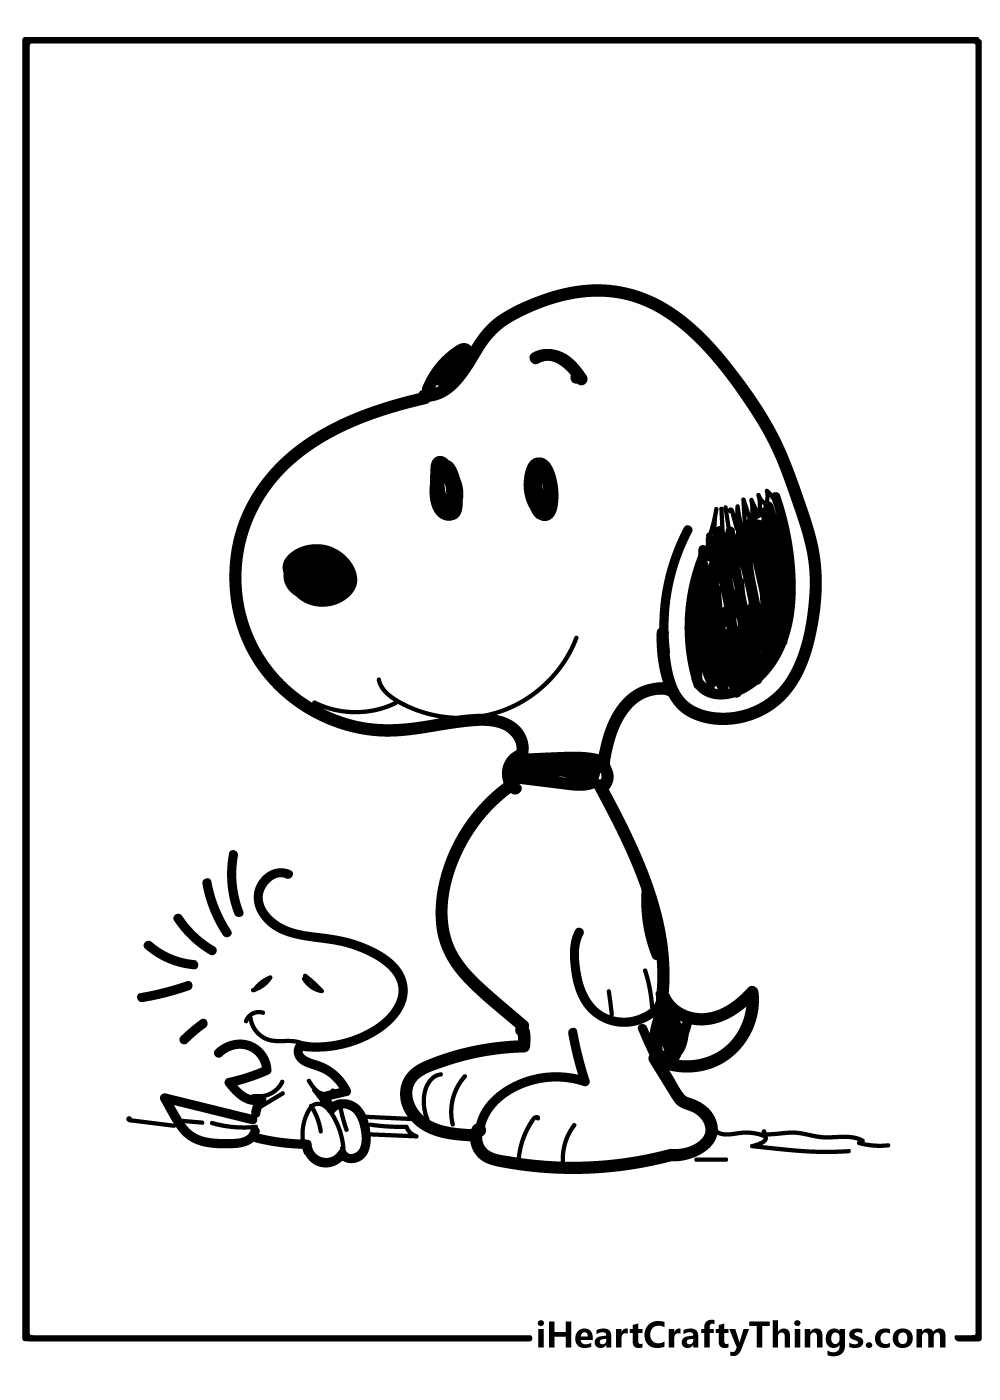 Snoopy Coloring Sheet for children free download